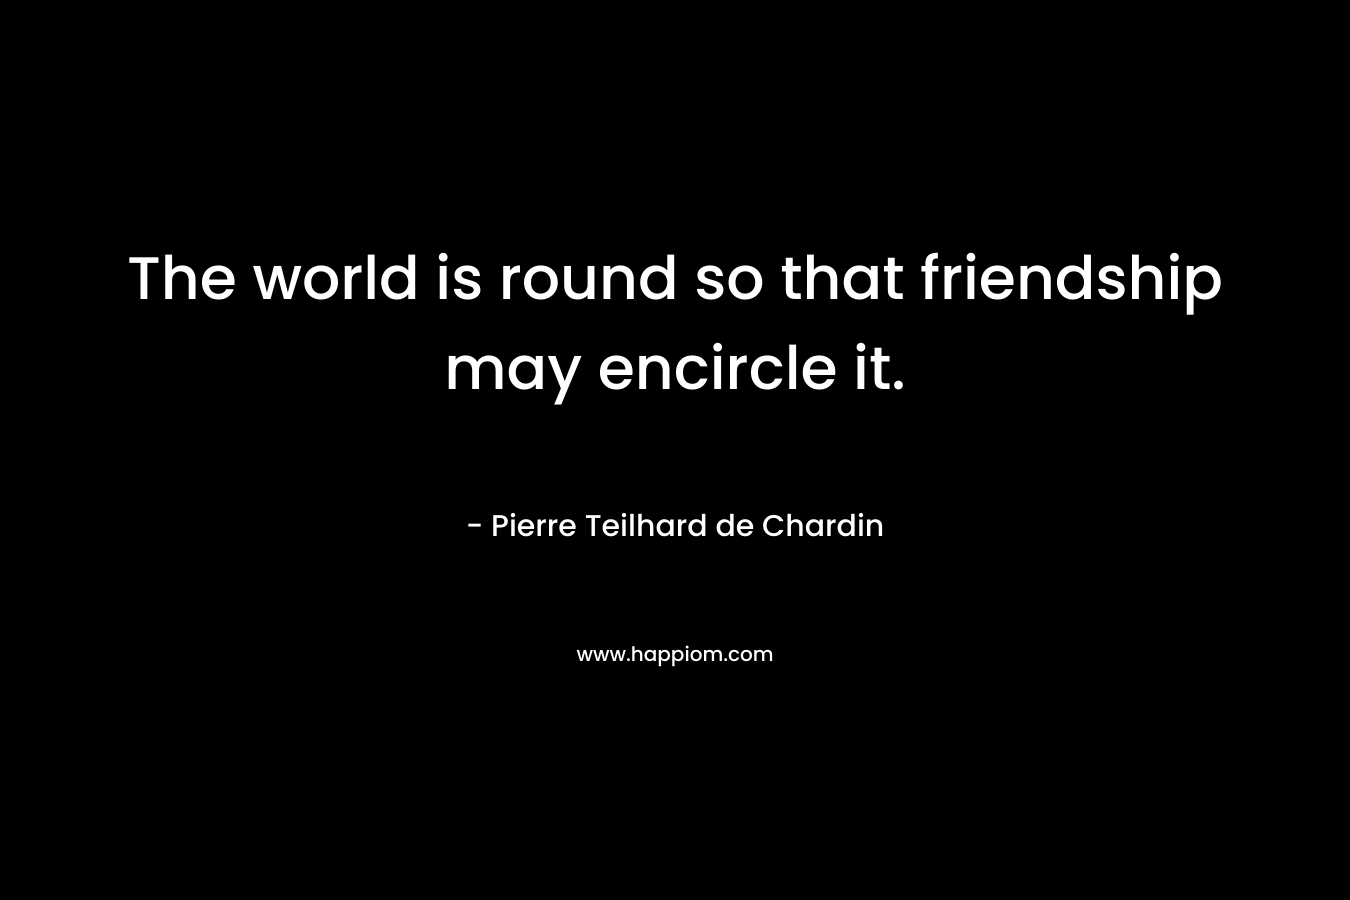 The world is round so that friendship may encircle it. – Pierre Teilhard de Chardin